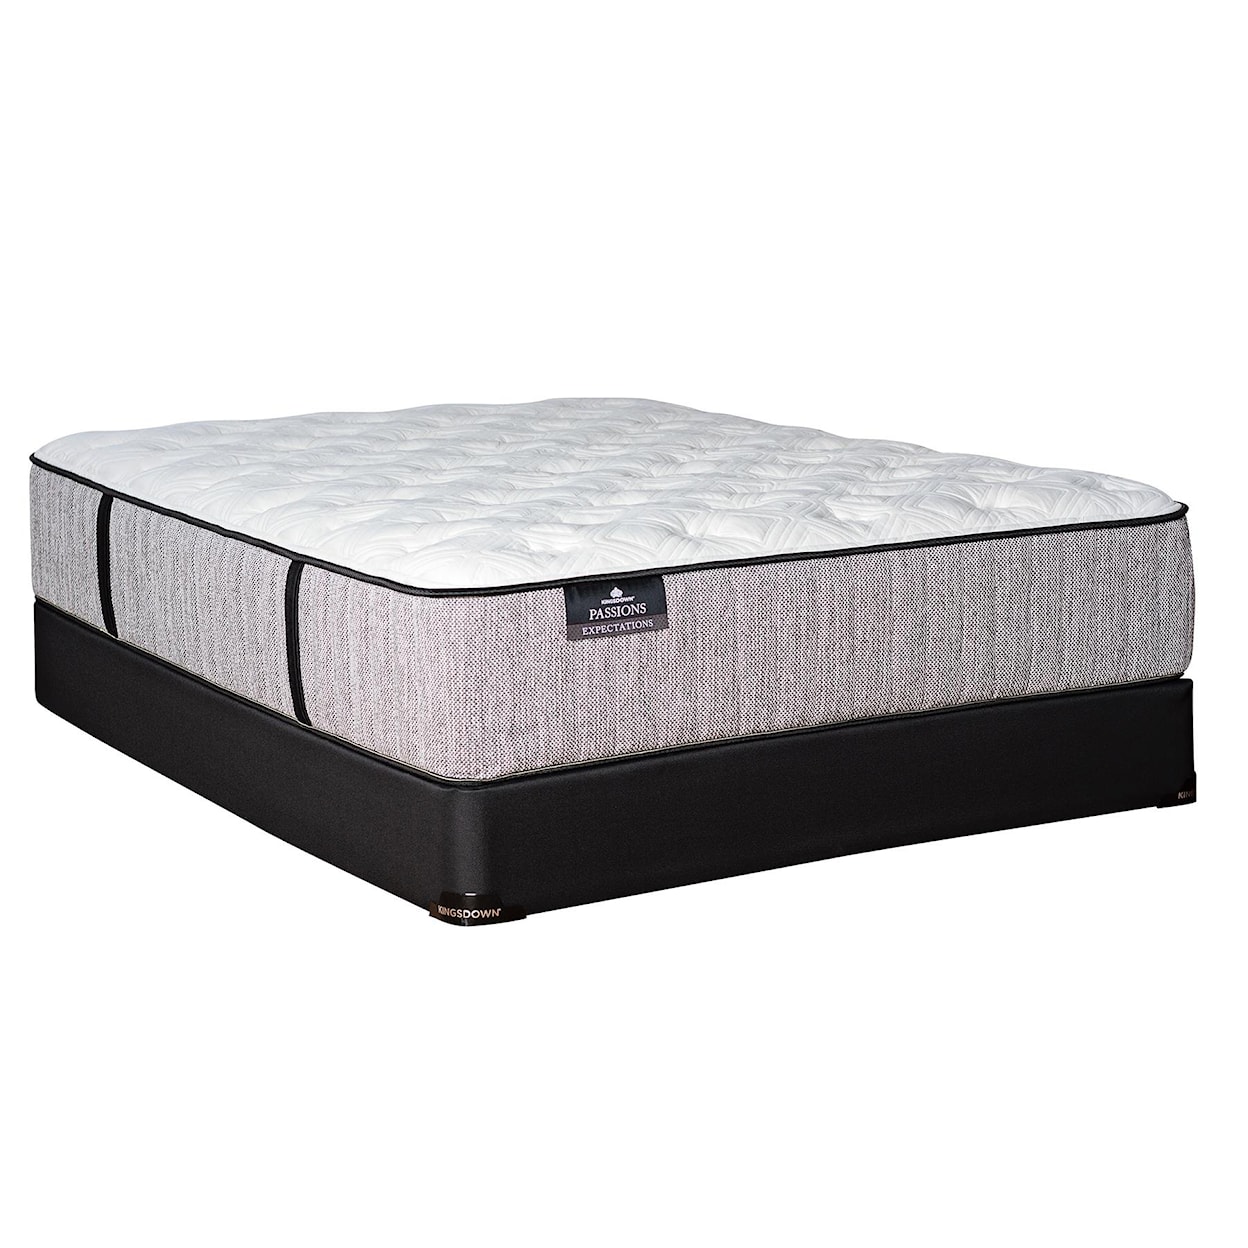 Kingsdown Passions Expectations Full Plush Mattress with Gel Memory Foam